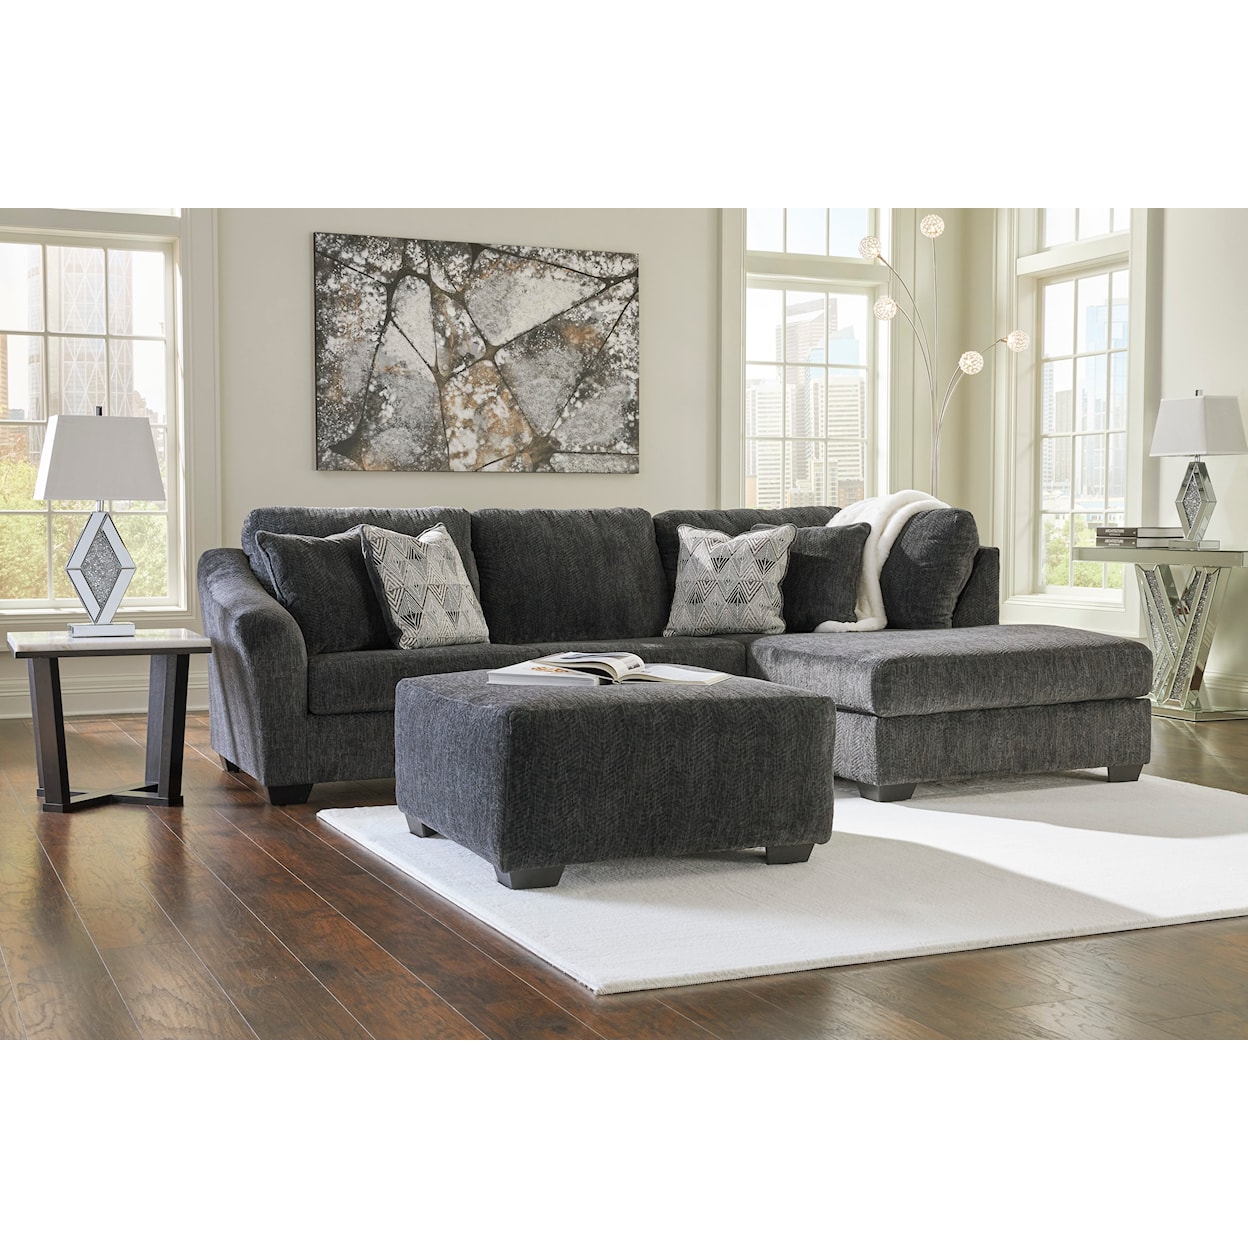 Benchcraft Biddeford 2-Piece Sectional with Chaise